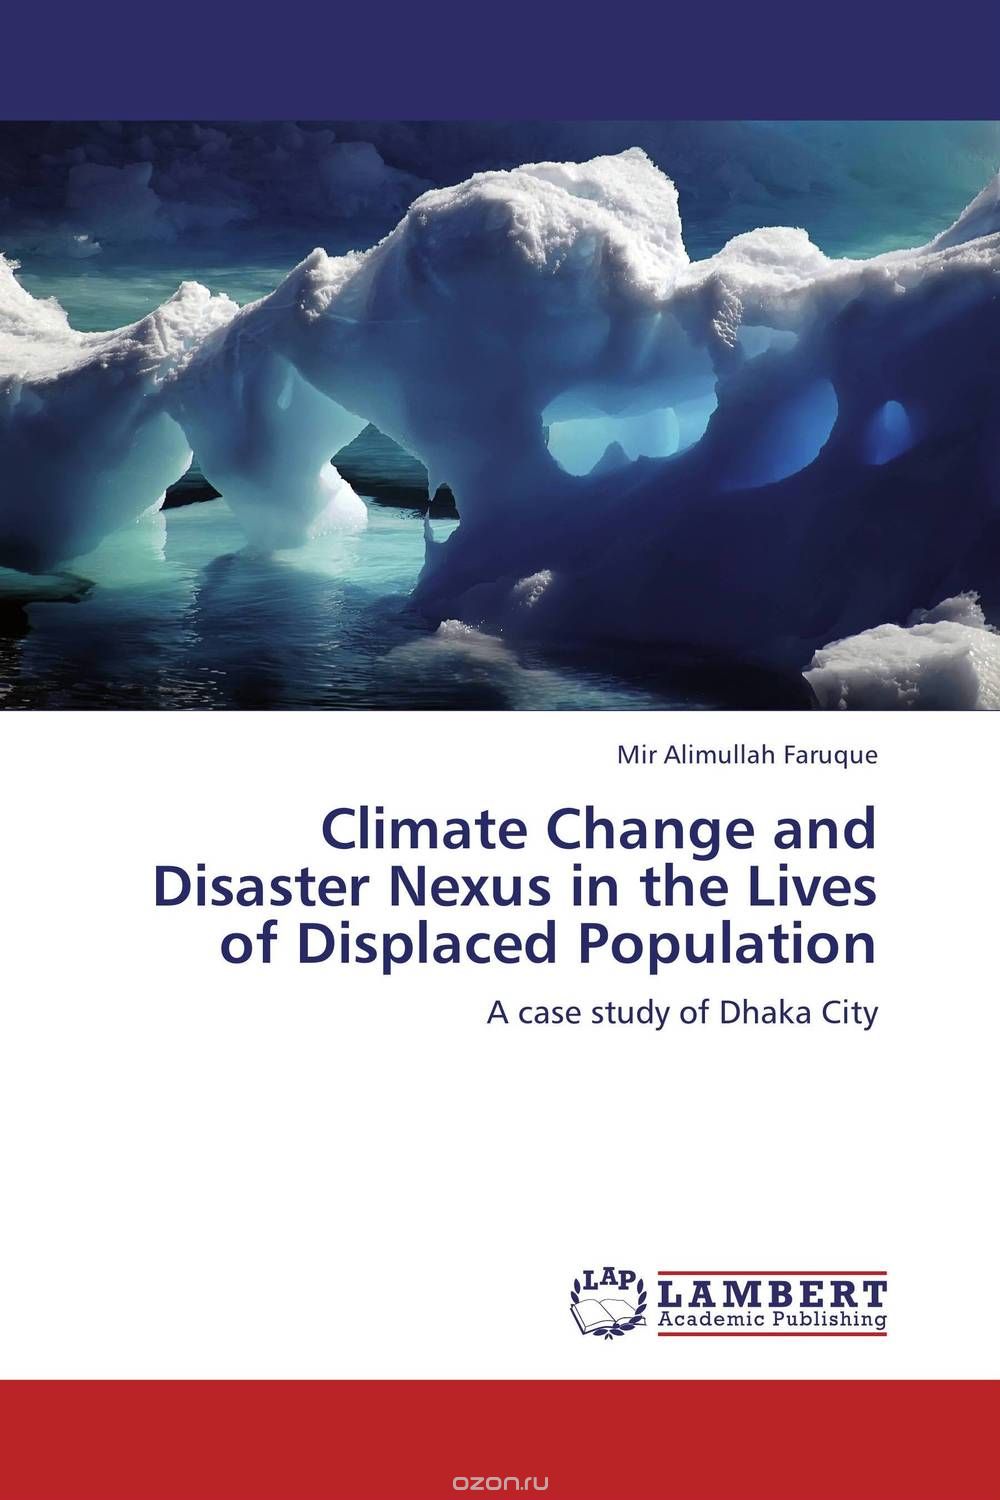 Скачать книгу "Climate Change and Disaster Nexus in the Lives of Displaced Population"